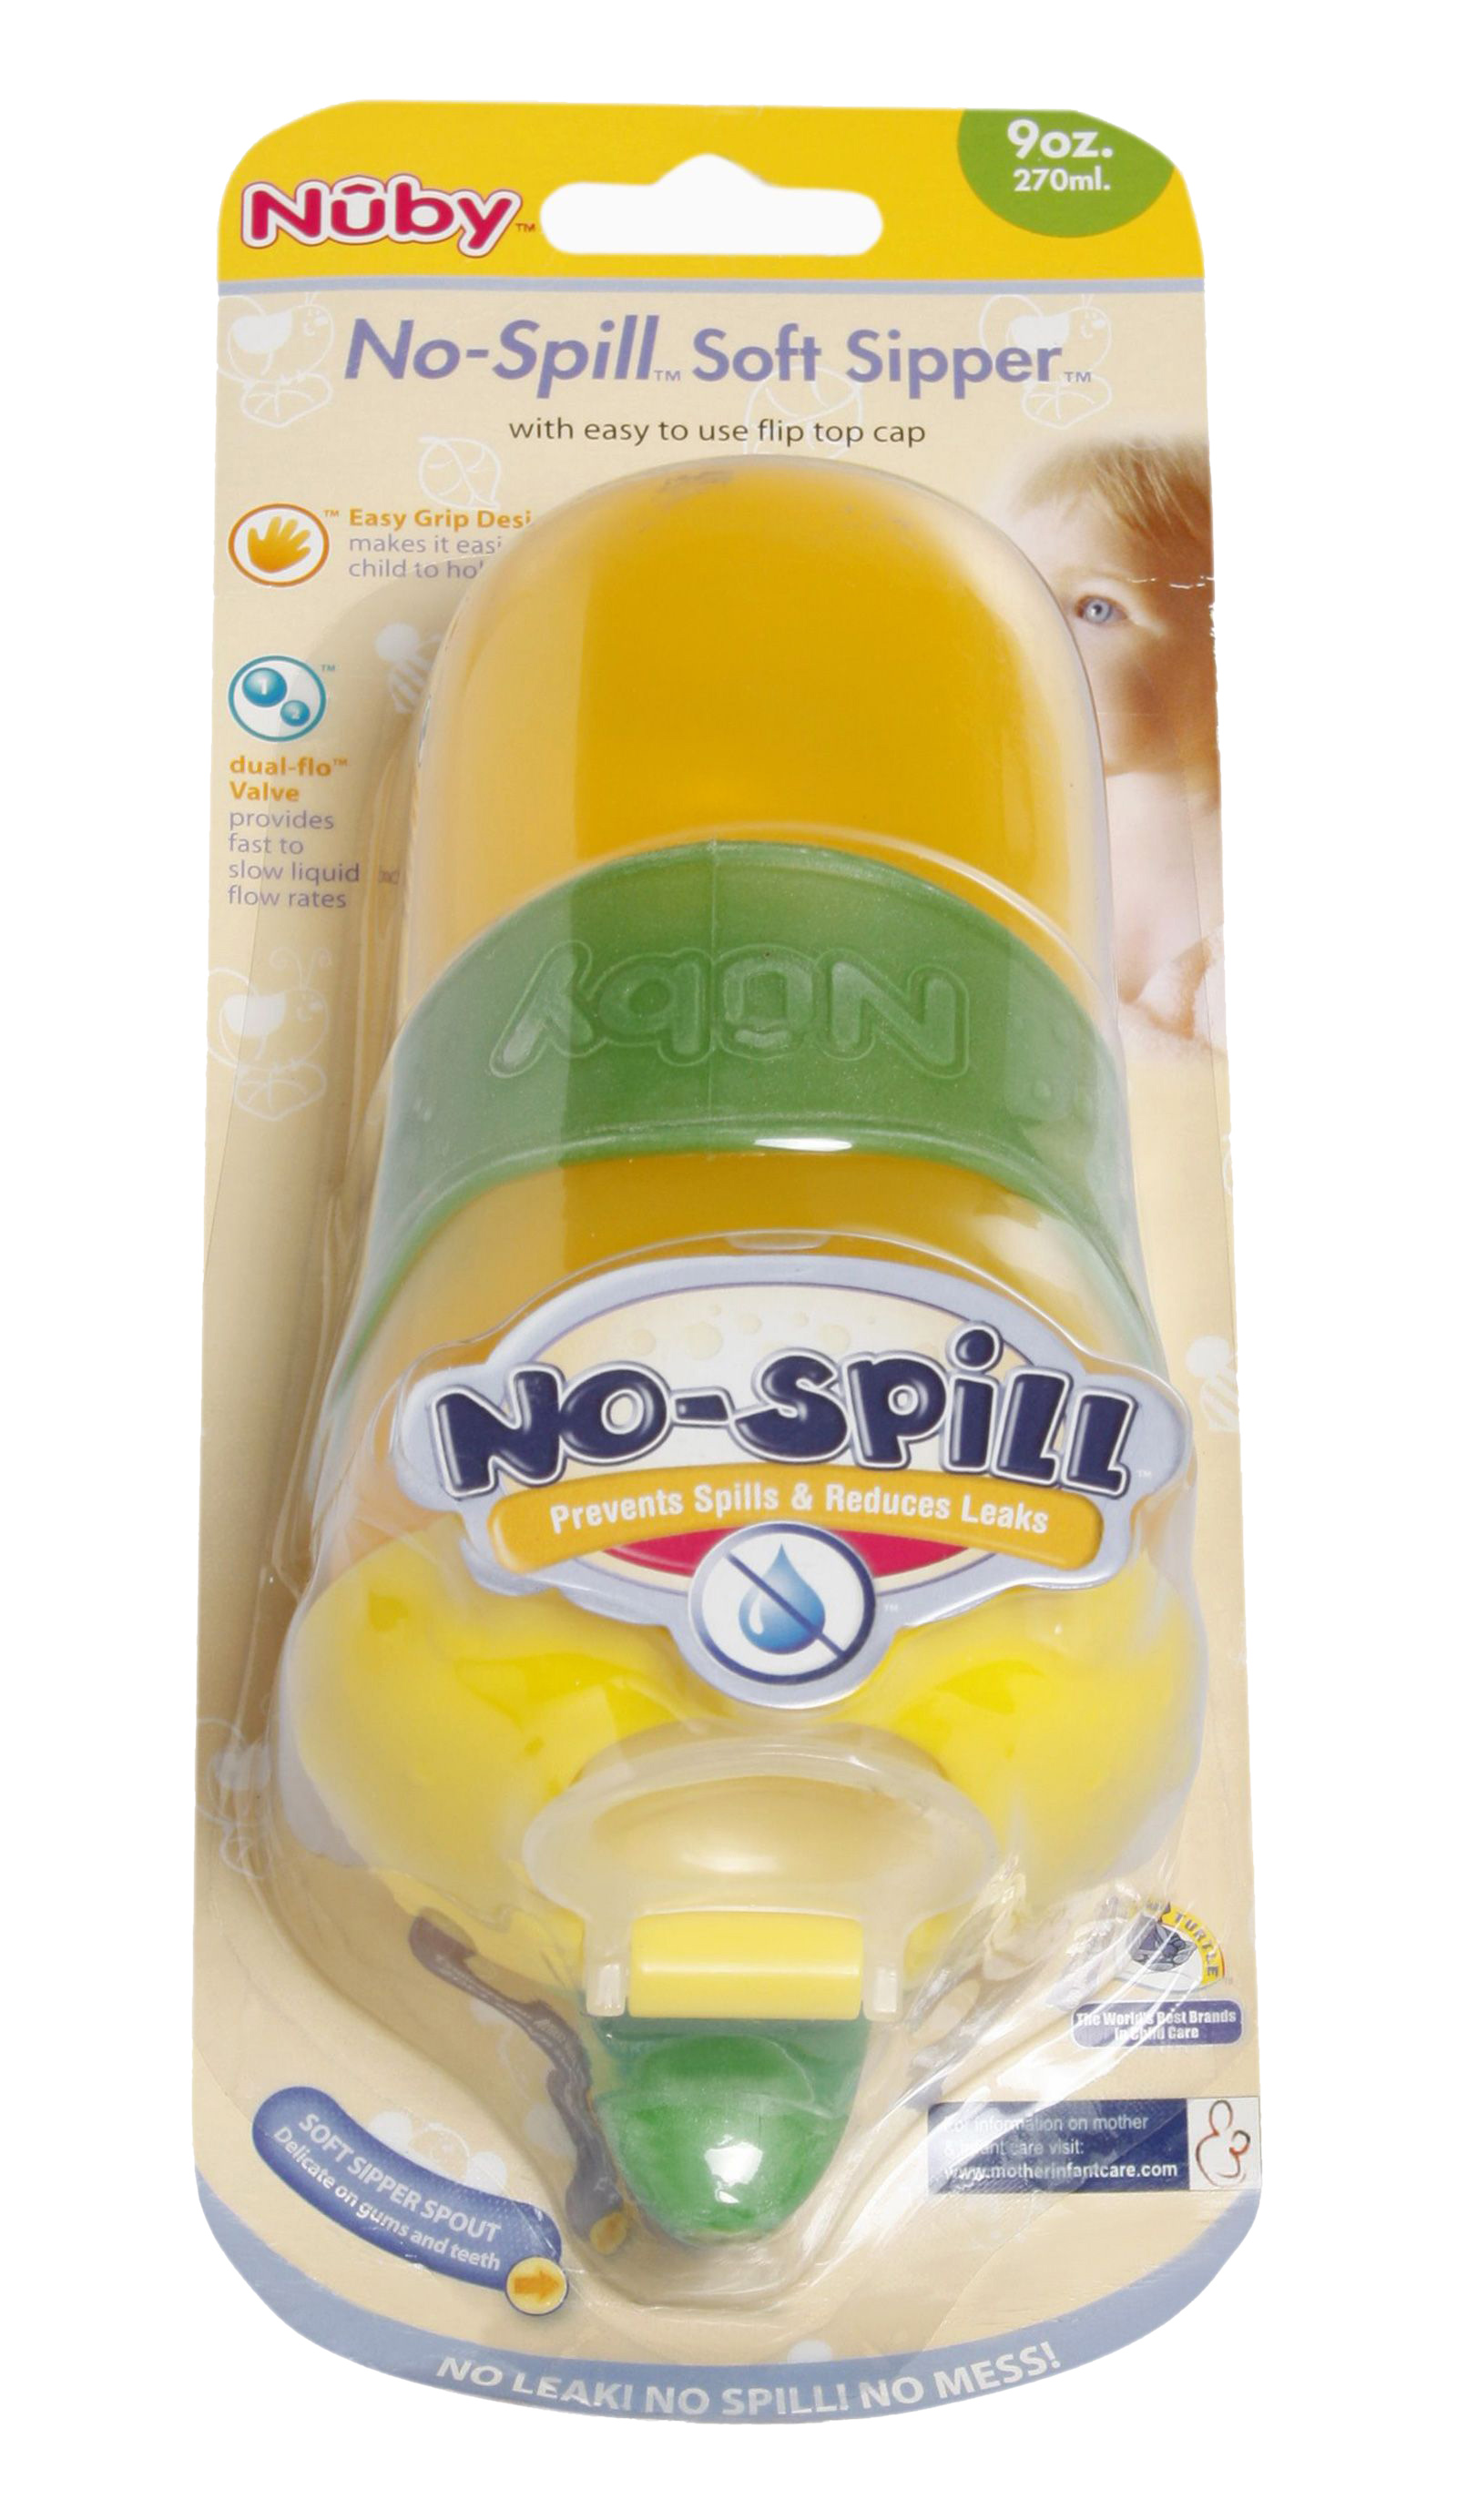 Nuby No-Spill Soft Sipper Cup